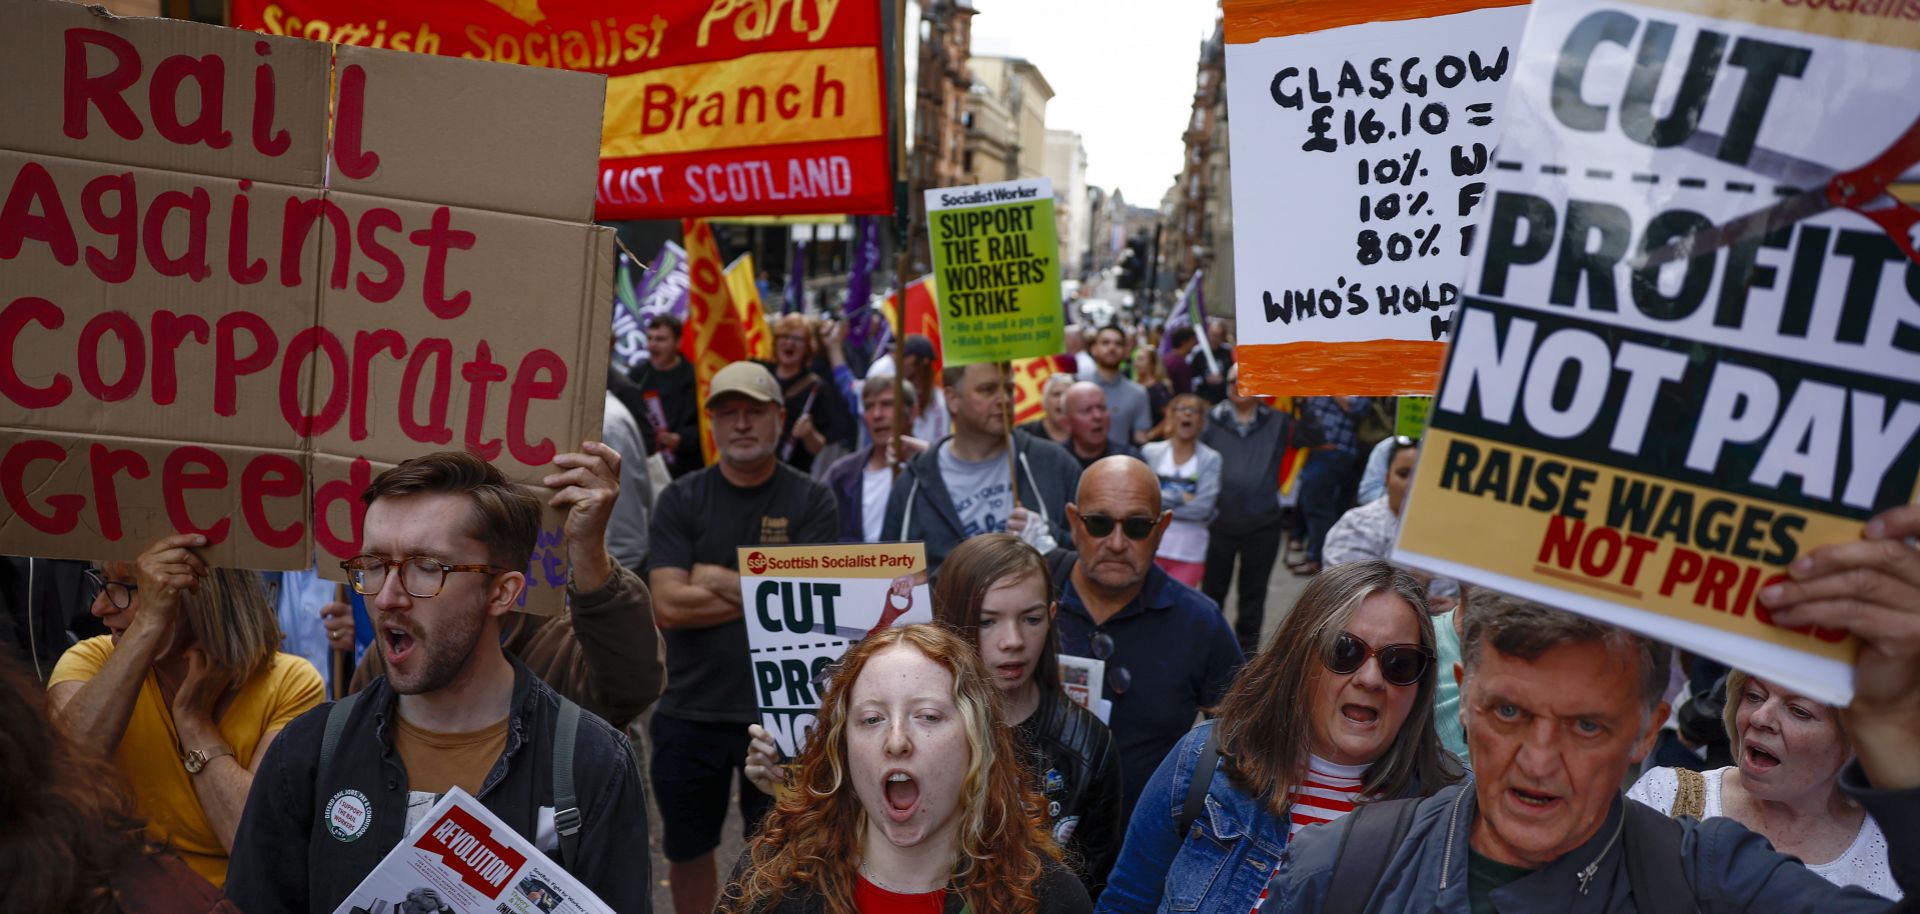 Supporters of the National Union of Rail, Maritime and Transport Workers (RMT) protest in Glasgow, Scotland, on July 27, 2022, as part of a nationwide strike among U.K. rail workers. 